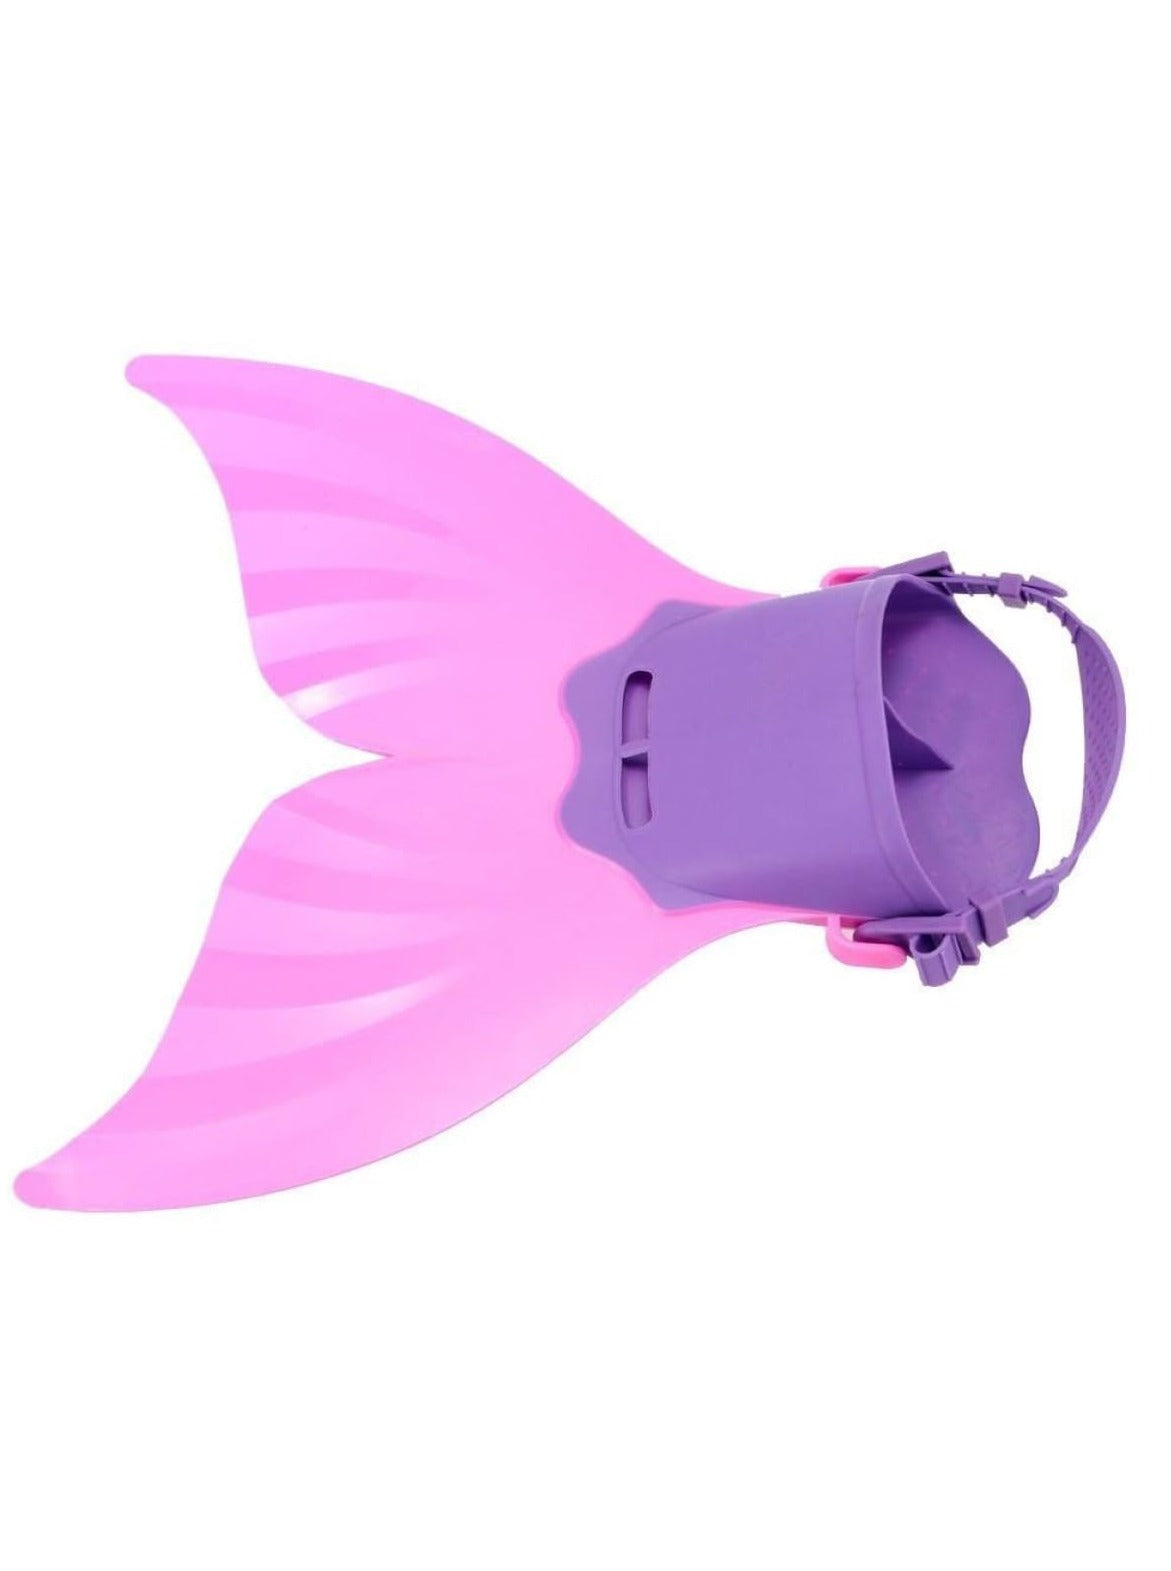 Girls Pink/Purple Monofin Tail - Girls Swimmable Monofin for Mermaid Tail